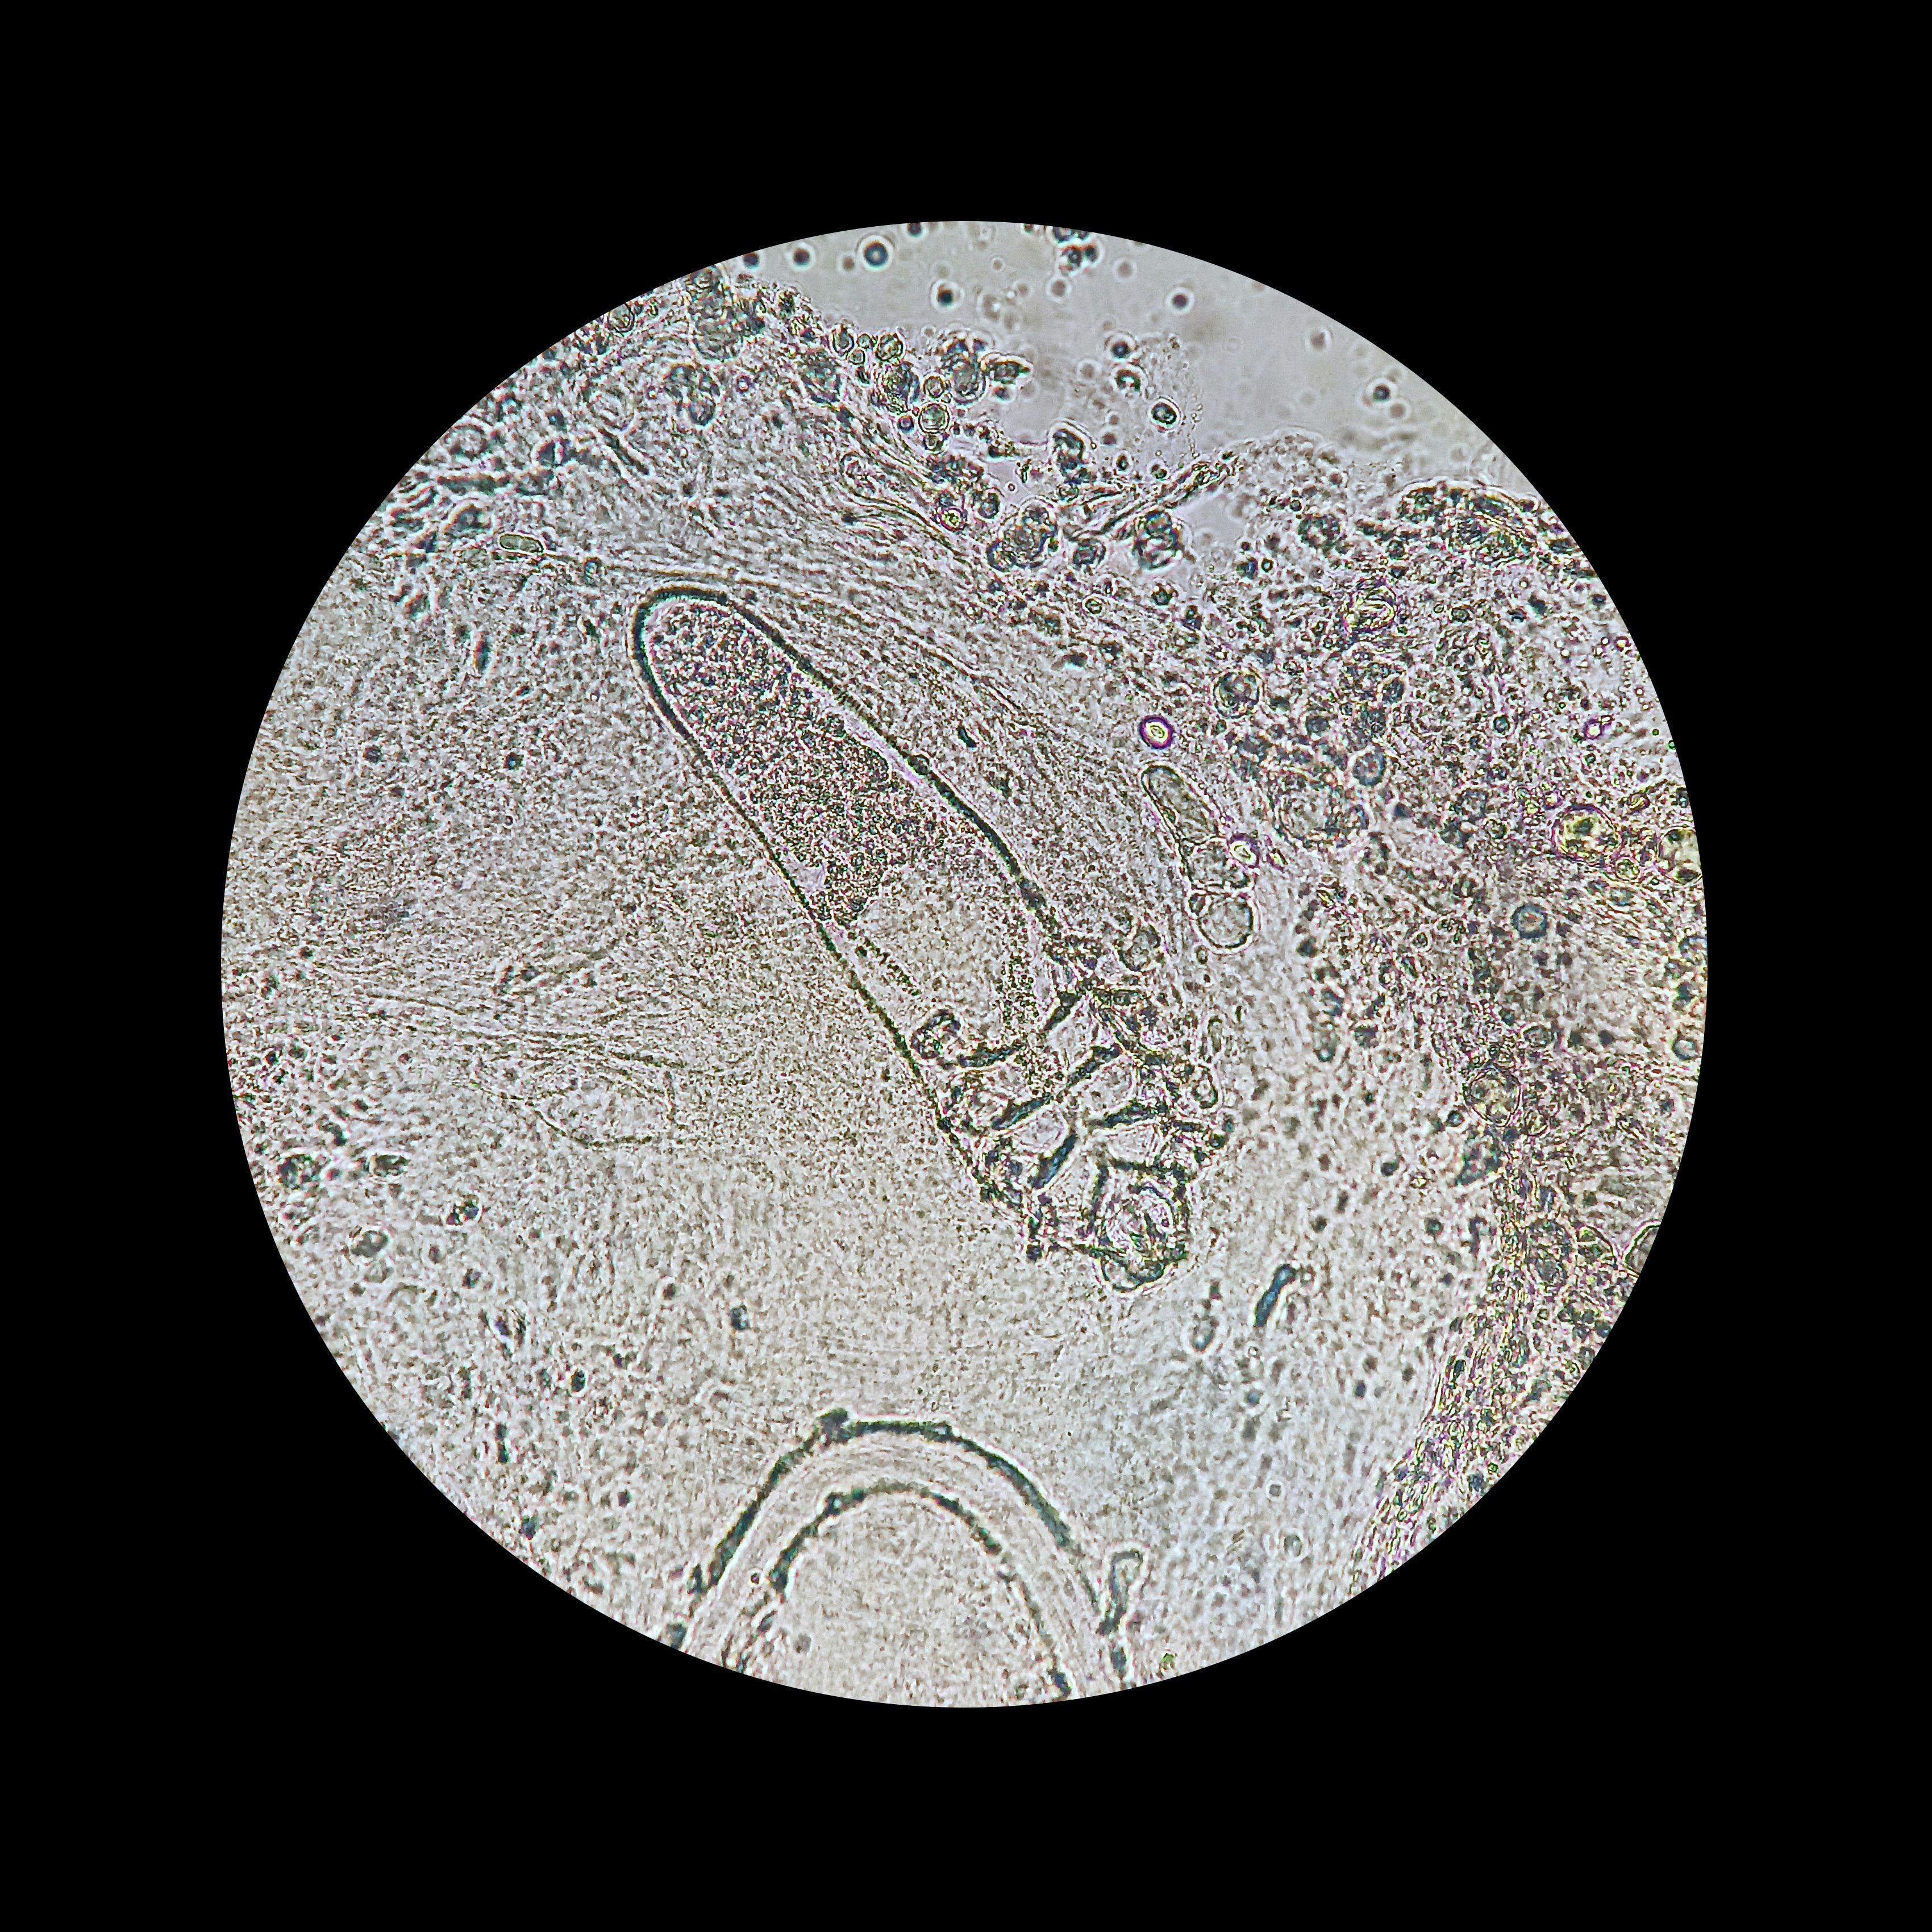 Demodex mite from a microscope view